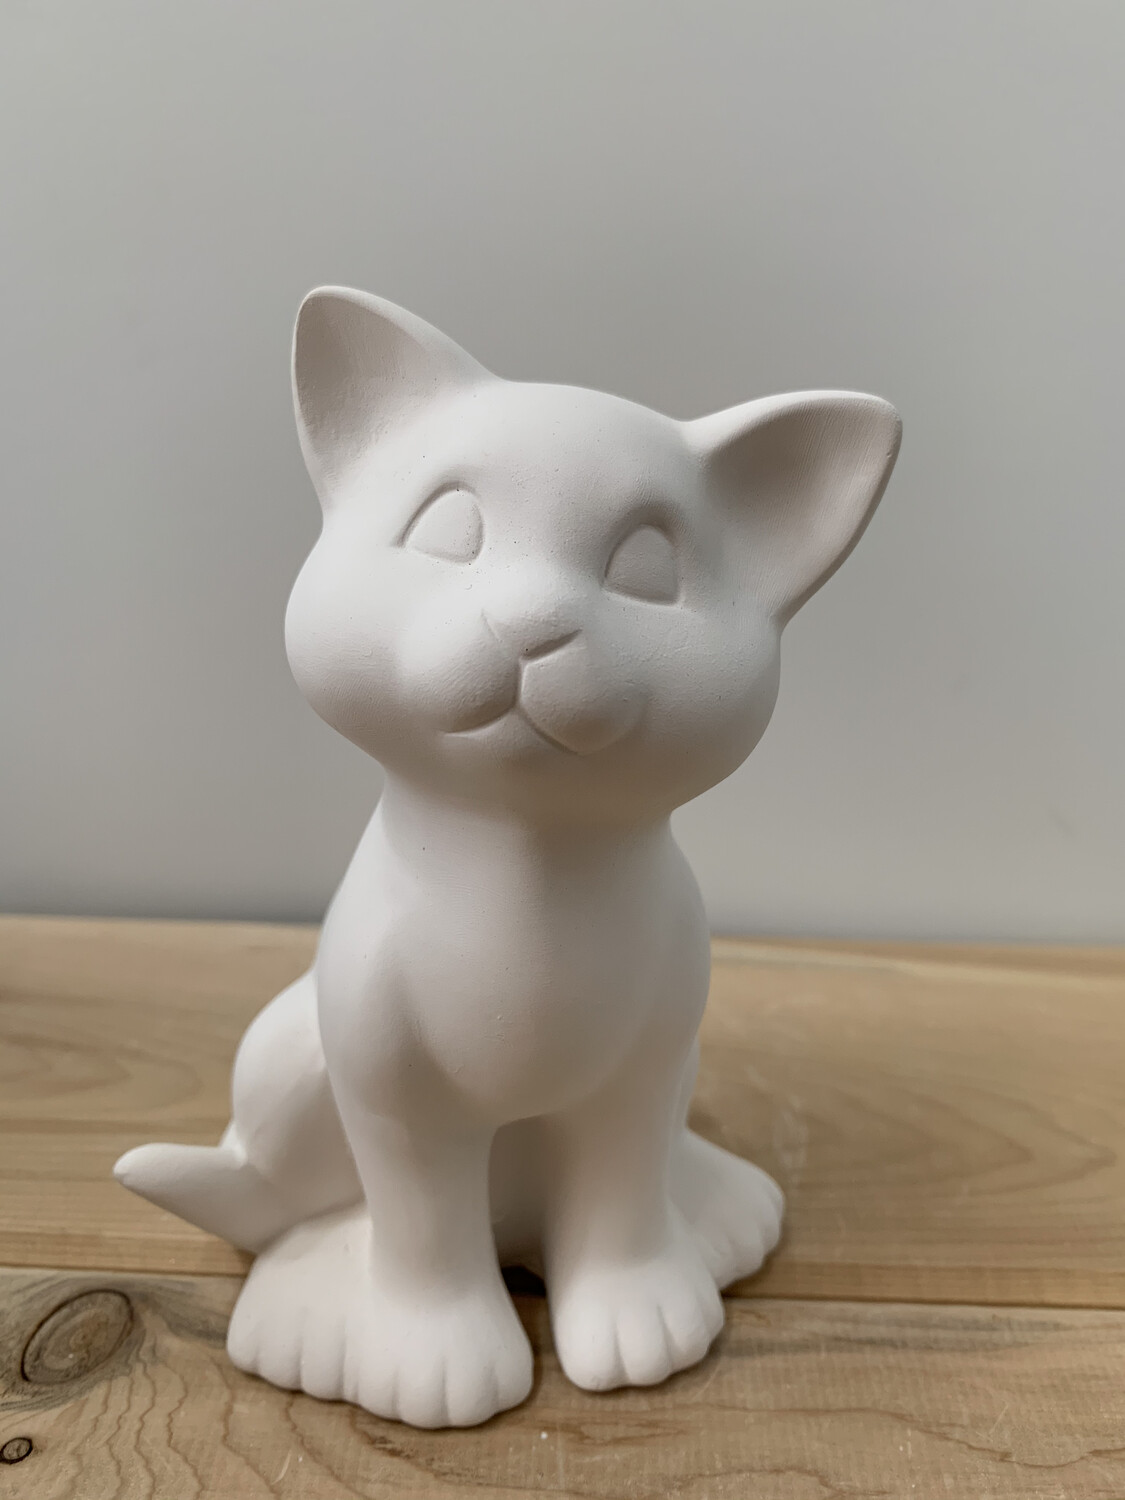 Paint Your Own Pottery - Ceramic
Cat Figurine Painting Kit